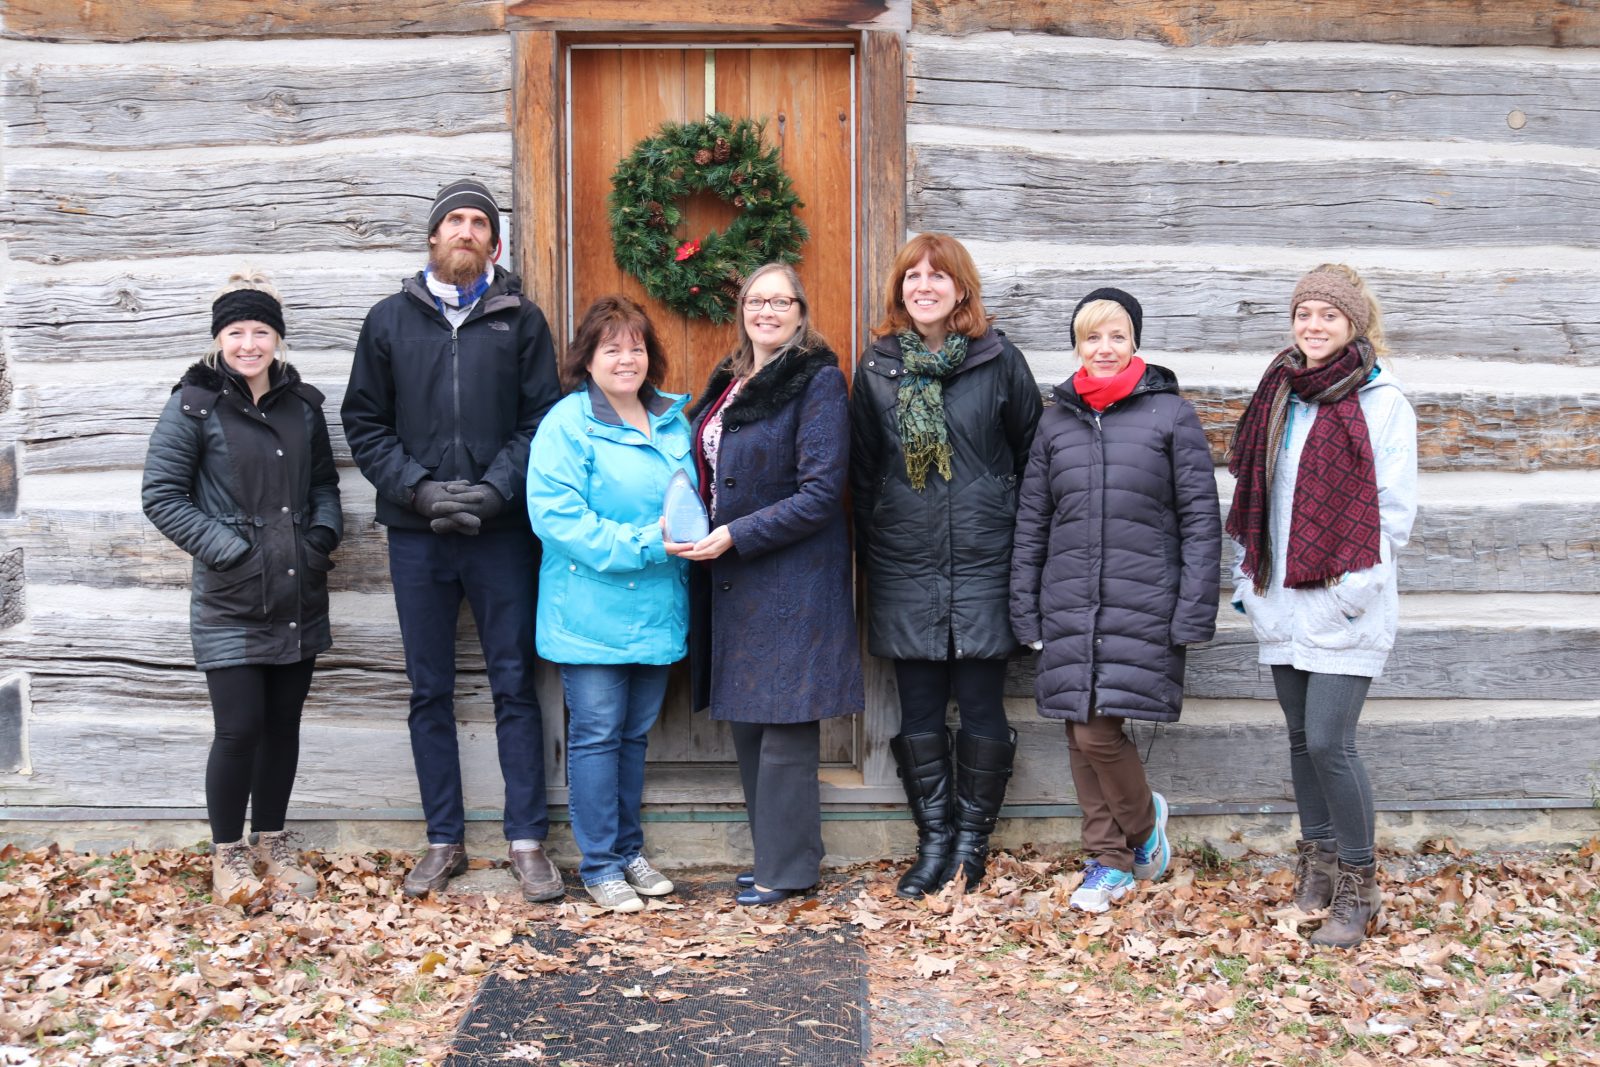 Upper Canada Village recognized for being dementia friendly